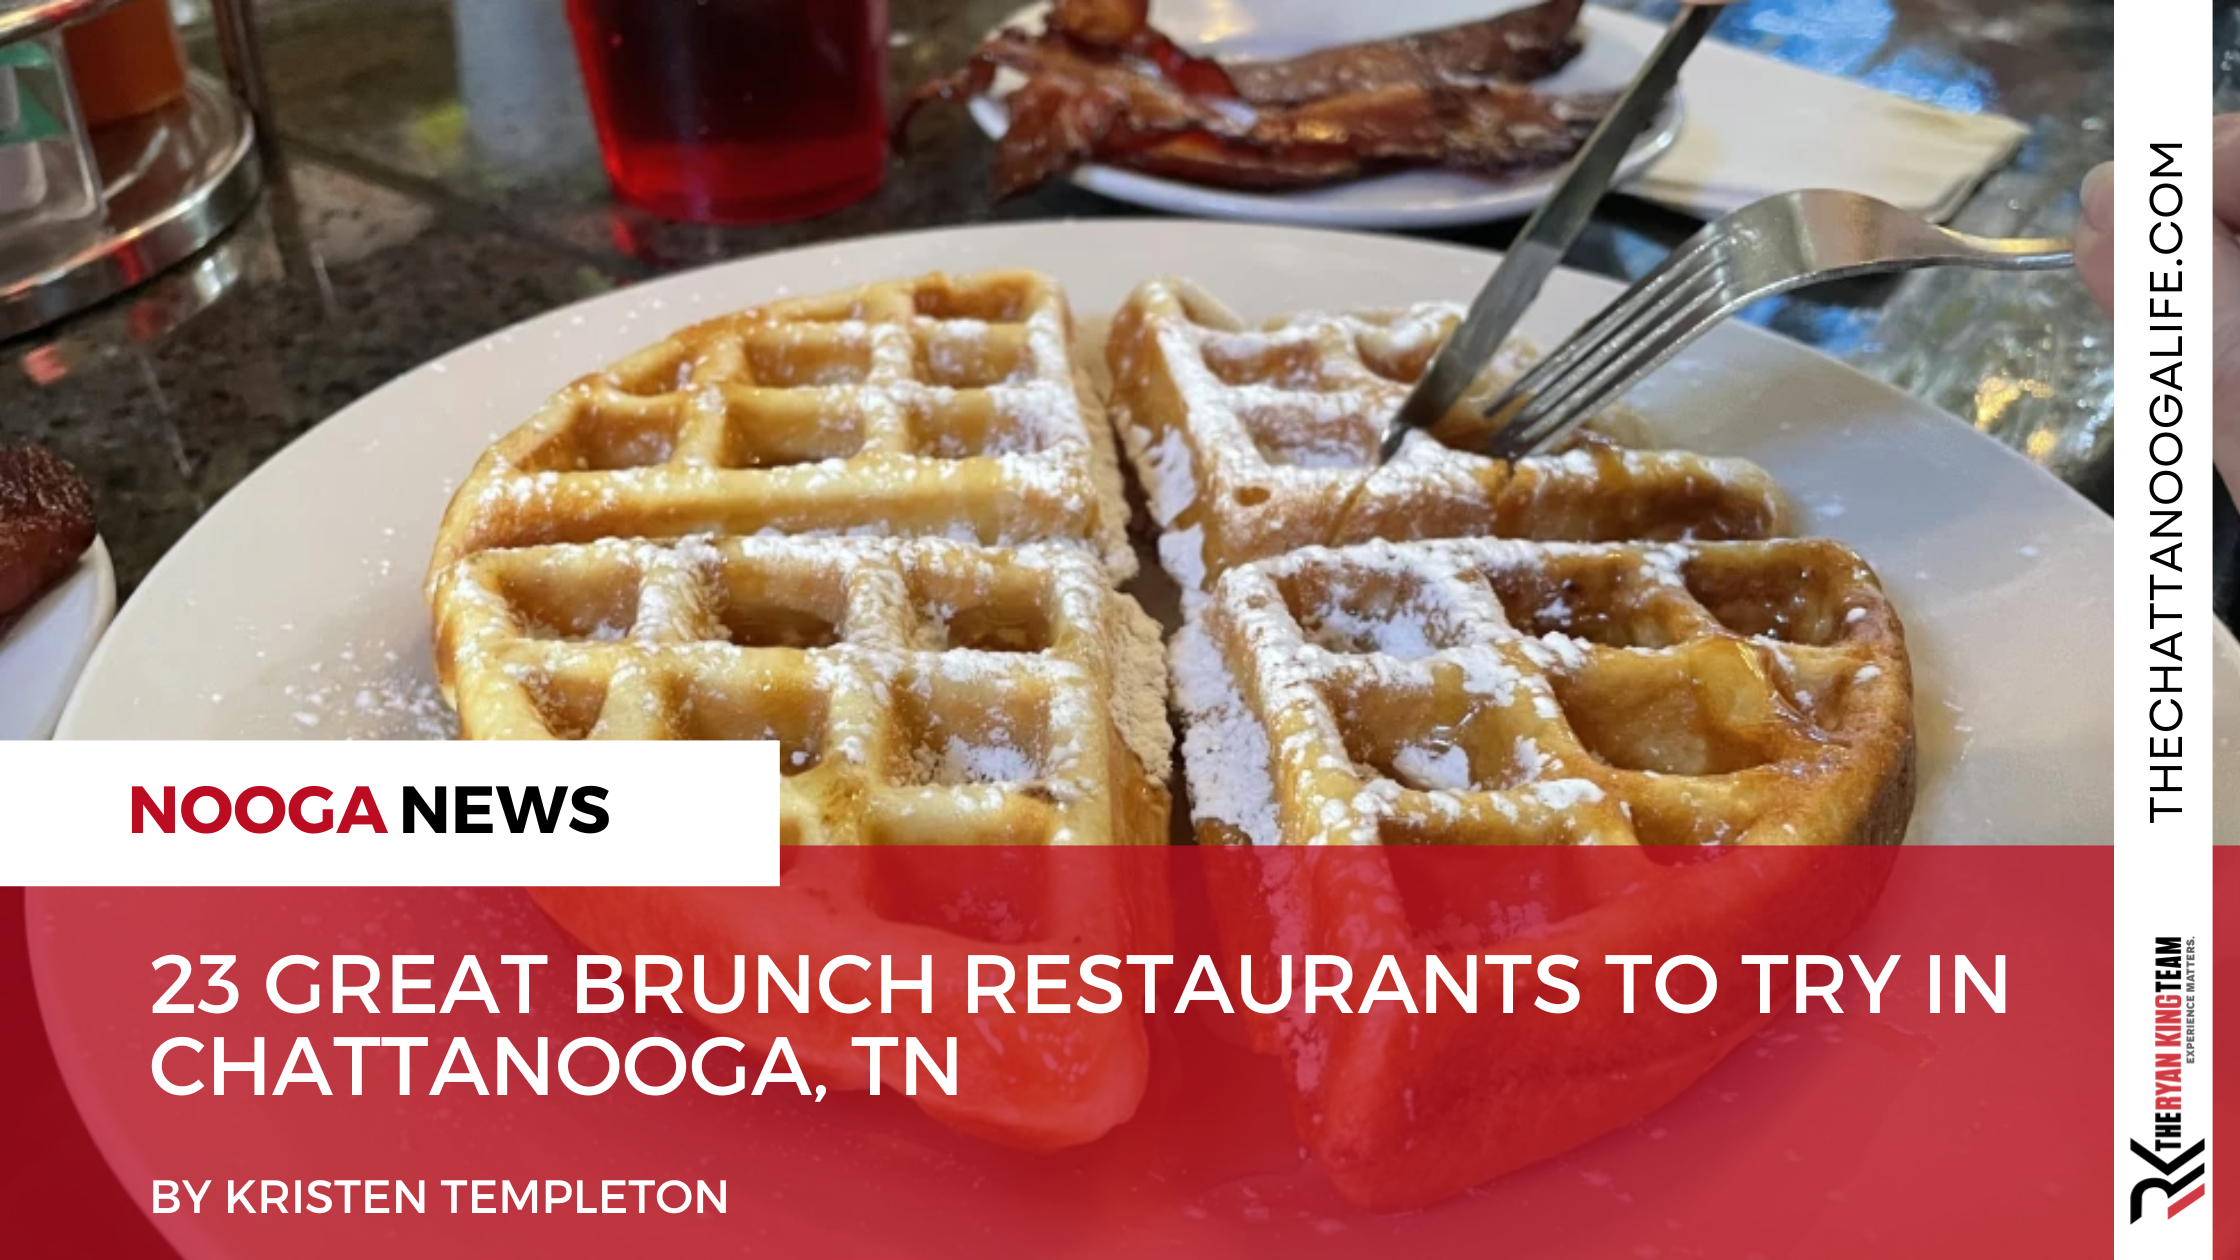 23 Great Brunch Restaurants To Try In Chattanooga, TN